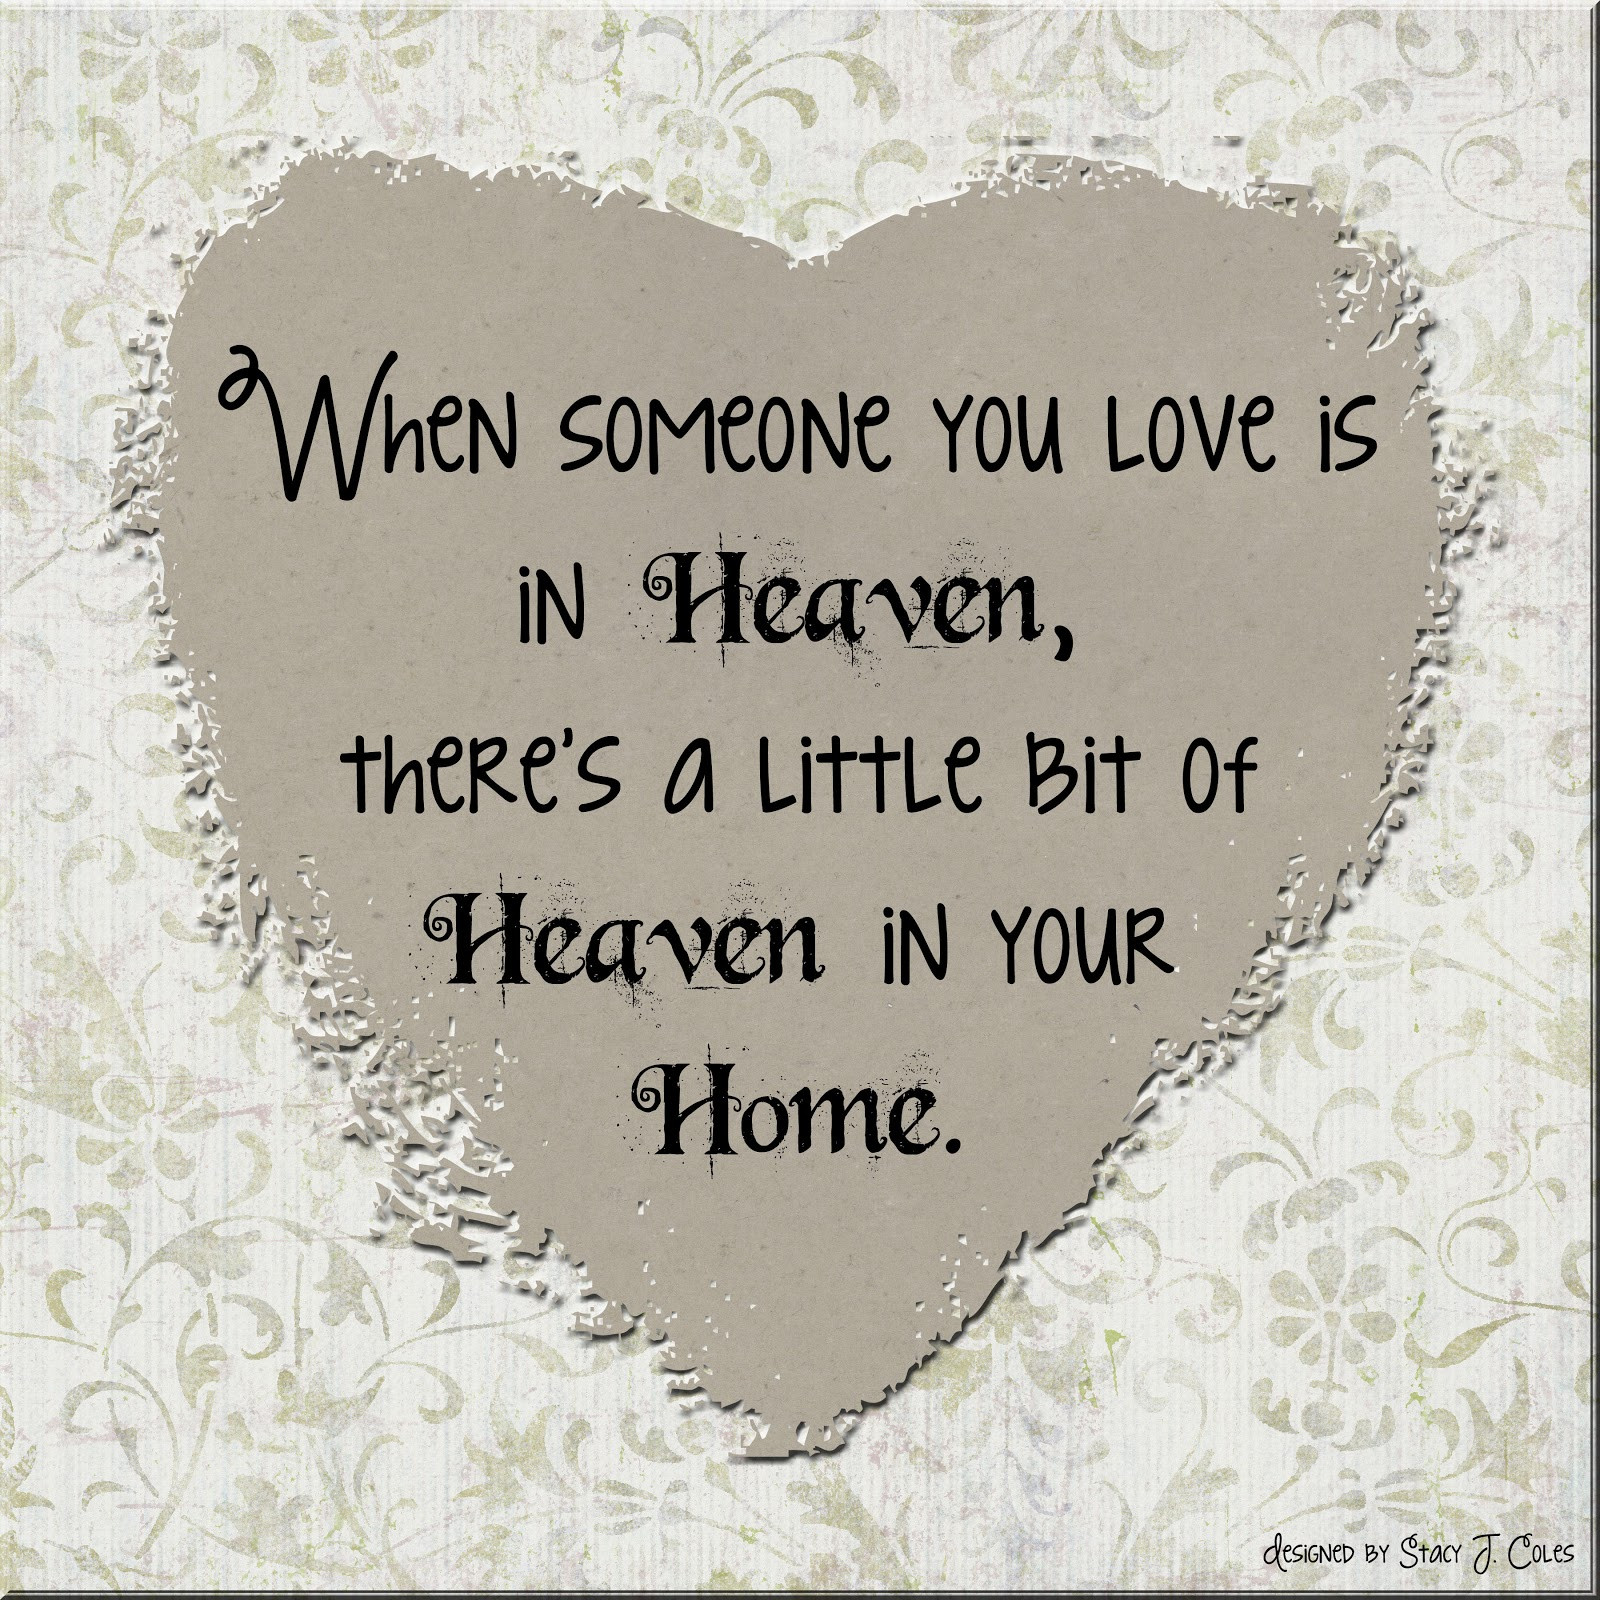 Missing My Mother Quote
 Missing Mom In Heaven Quotes QuotesGram